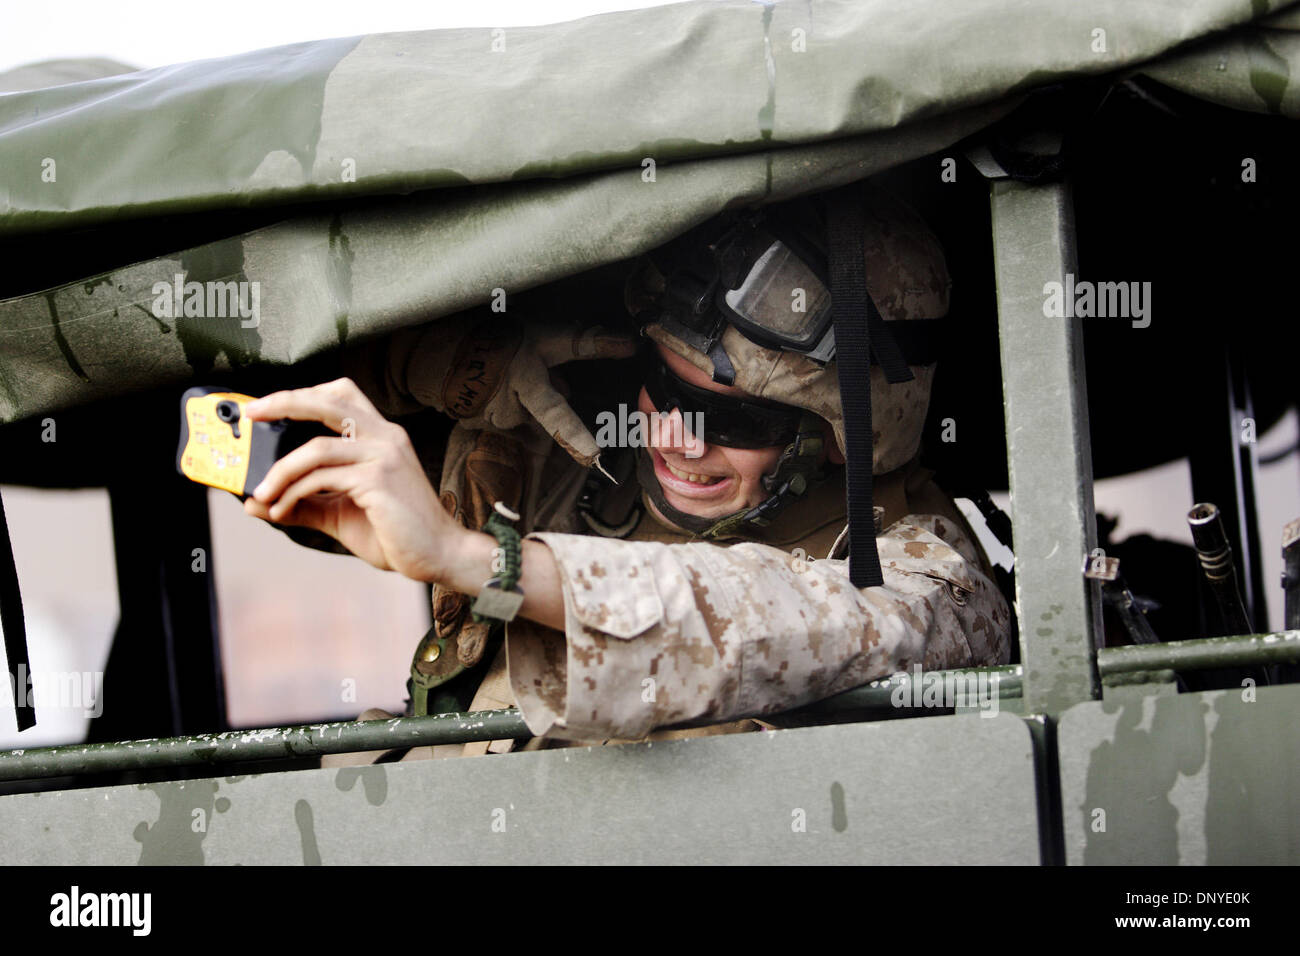 Jan 28, 2006; Al-Falujah, IRAQ; Lance Corporal Mike Dalrymple, a marine from Echo Company, Second battalion, 6th Marines, RCT-8, takes a picture of himself in the back of a 'Super Seven' 7-ton troop transport truck before going on patrol in Al-Falujah. Mandatory Credit: Photo by Toby Morris/ZUMA Press. (©) Copyright 2006 by Toby Morris Stock Photo